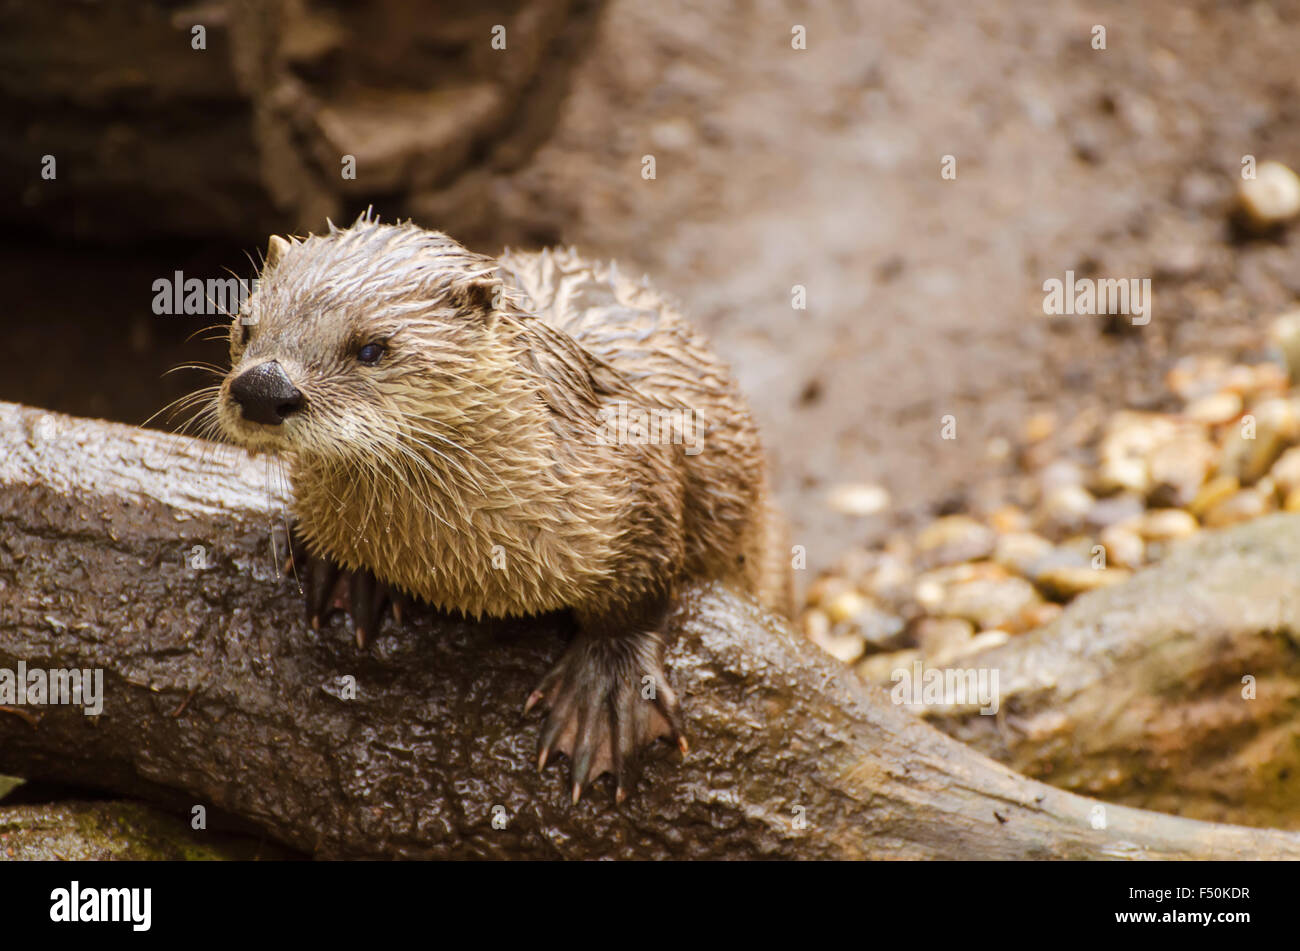 Otter on a tree trunk Stock Photo